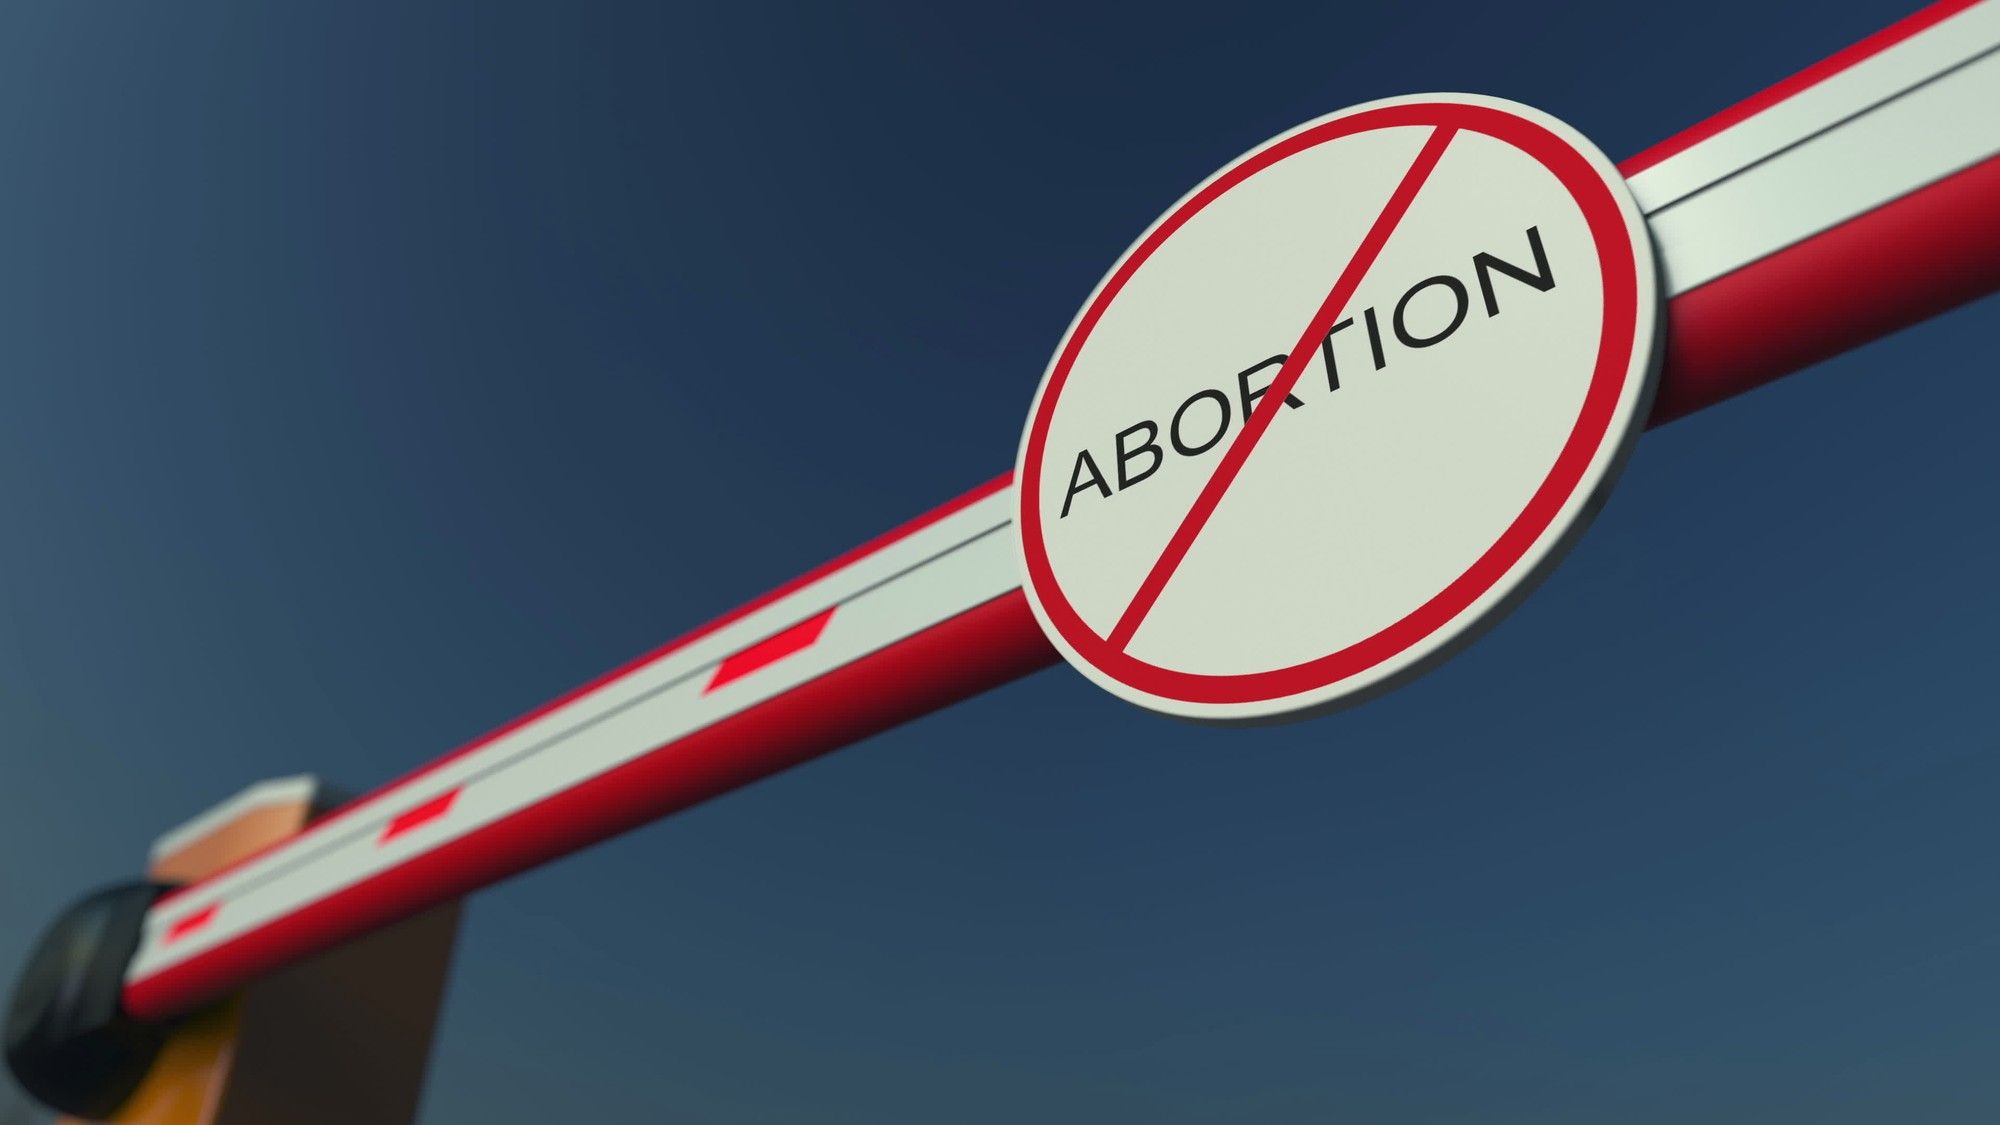 A recent class action challenges West Virginia's abortion ban which is in place during the COVID-19 outbreak.